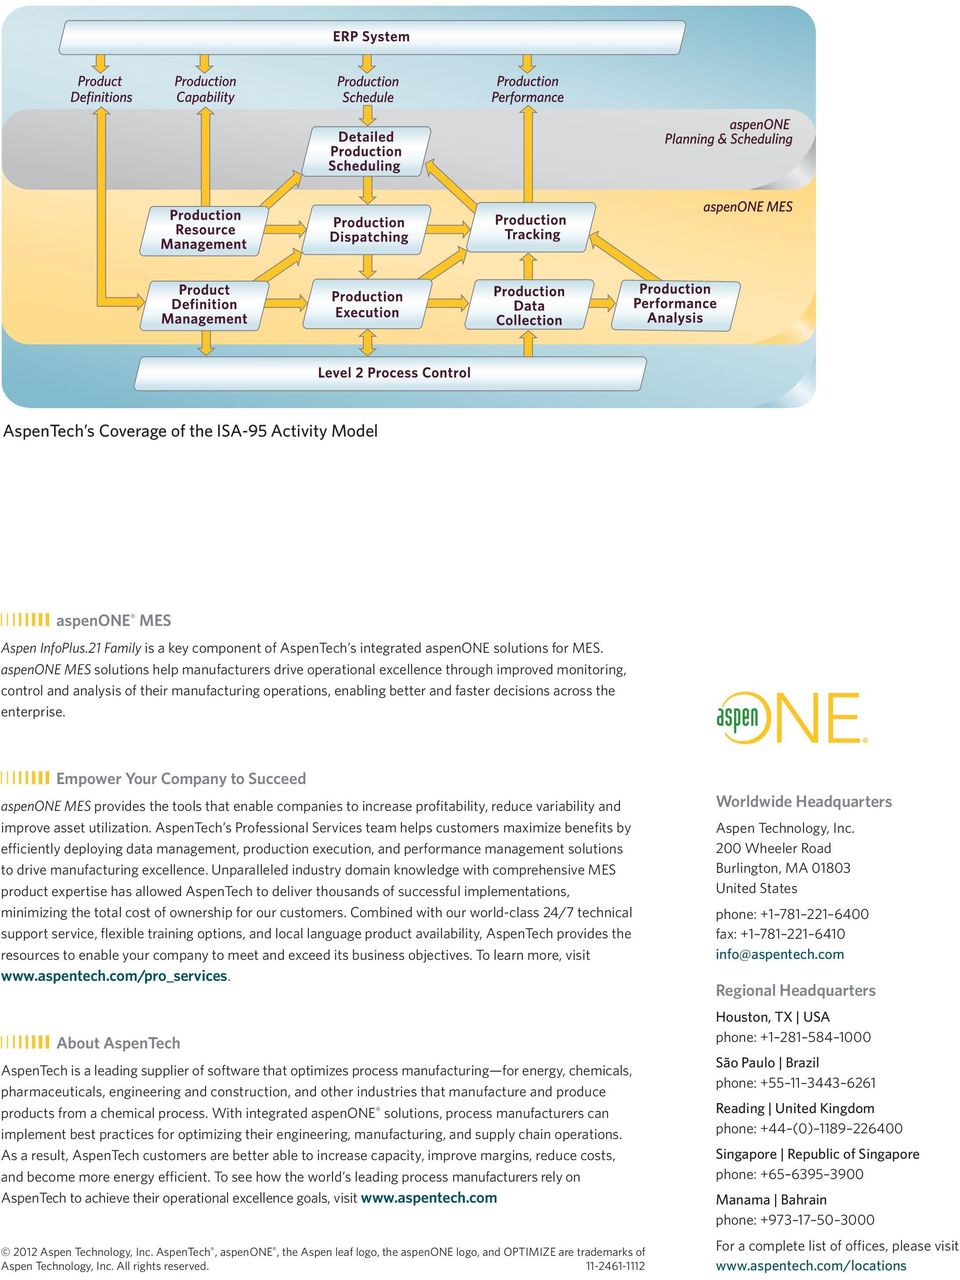 the enterprise. Empower Your Company to Succeed aspenone MES provides the tools that enable companies to increase profitability, reduce variability and improve asset utilization.